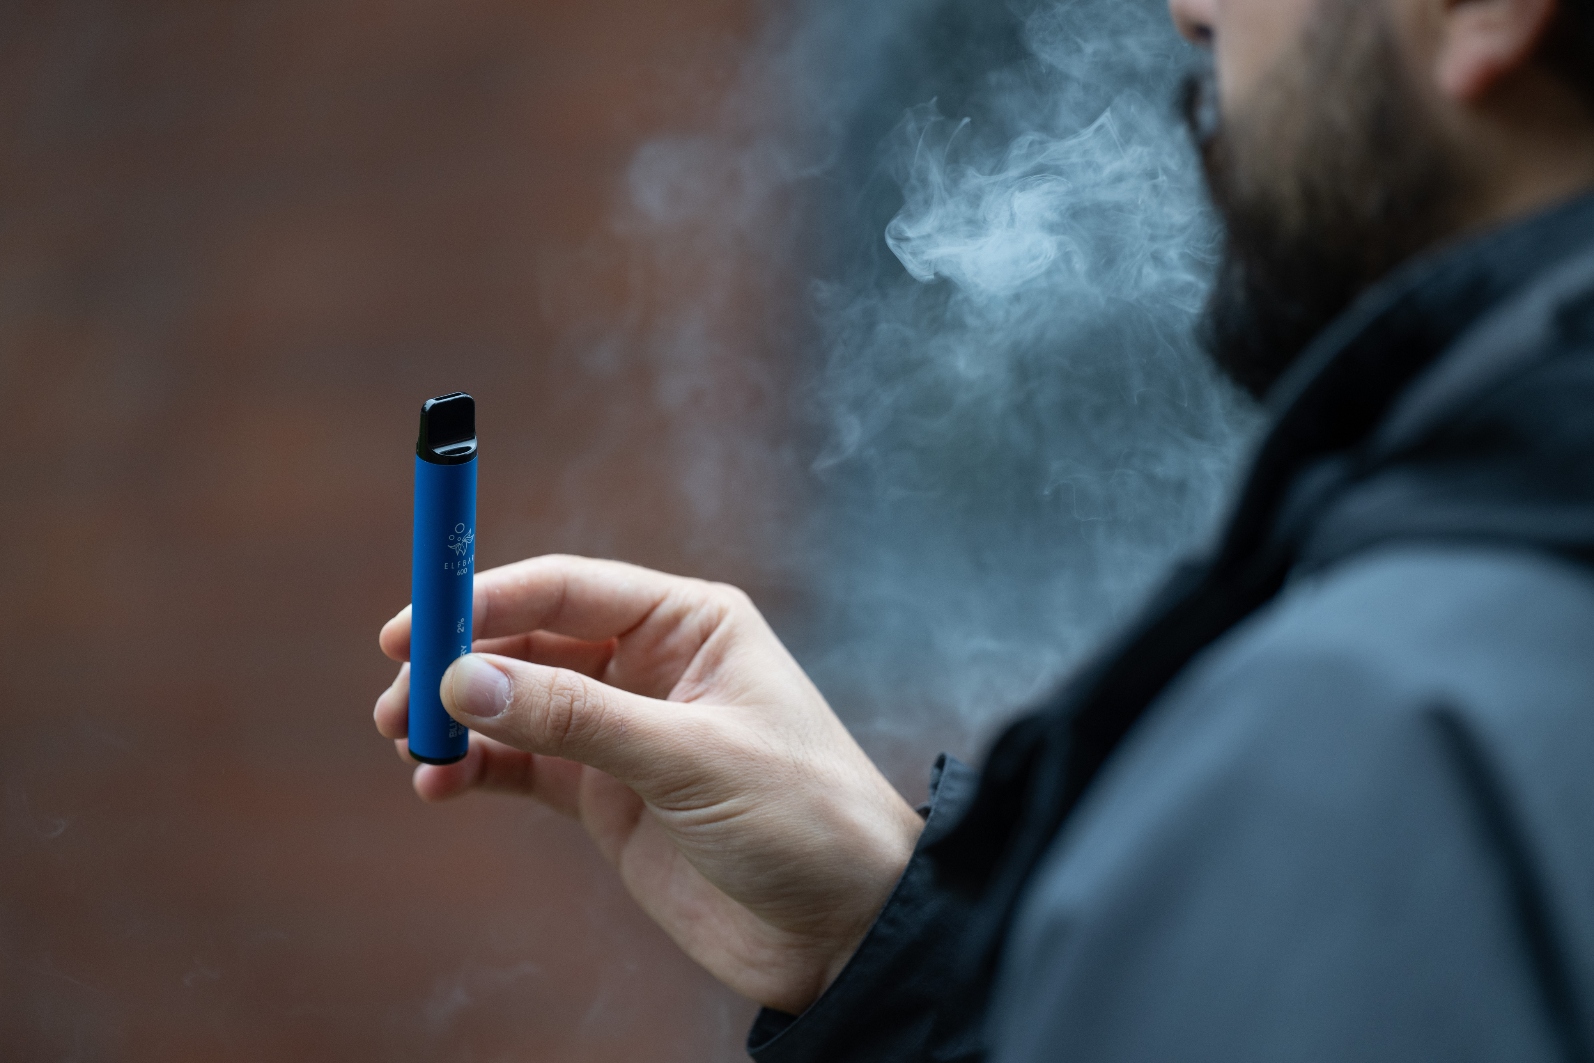 New vaping laws are “insulting”, major pharmacies say